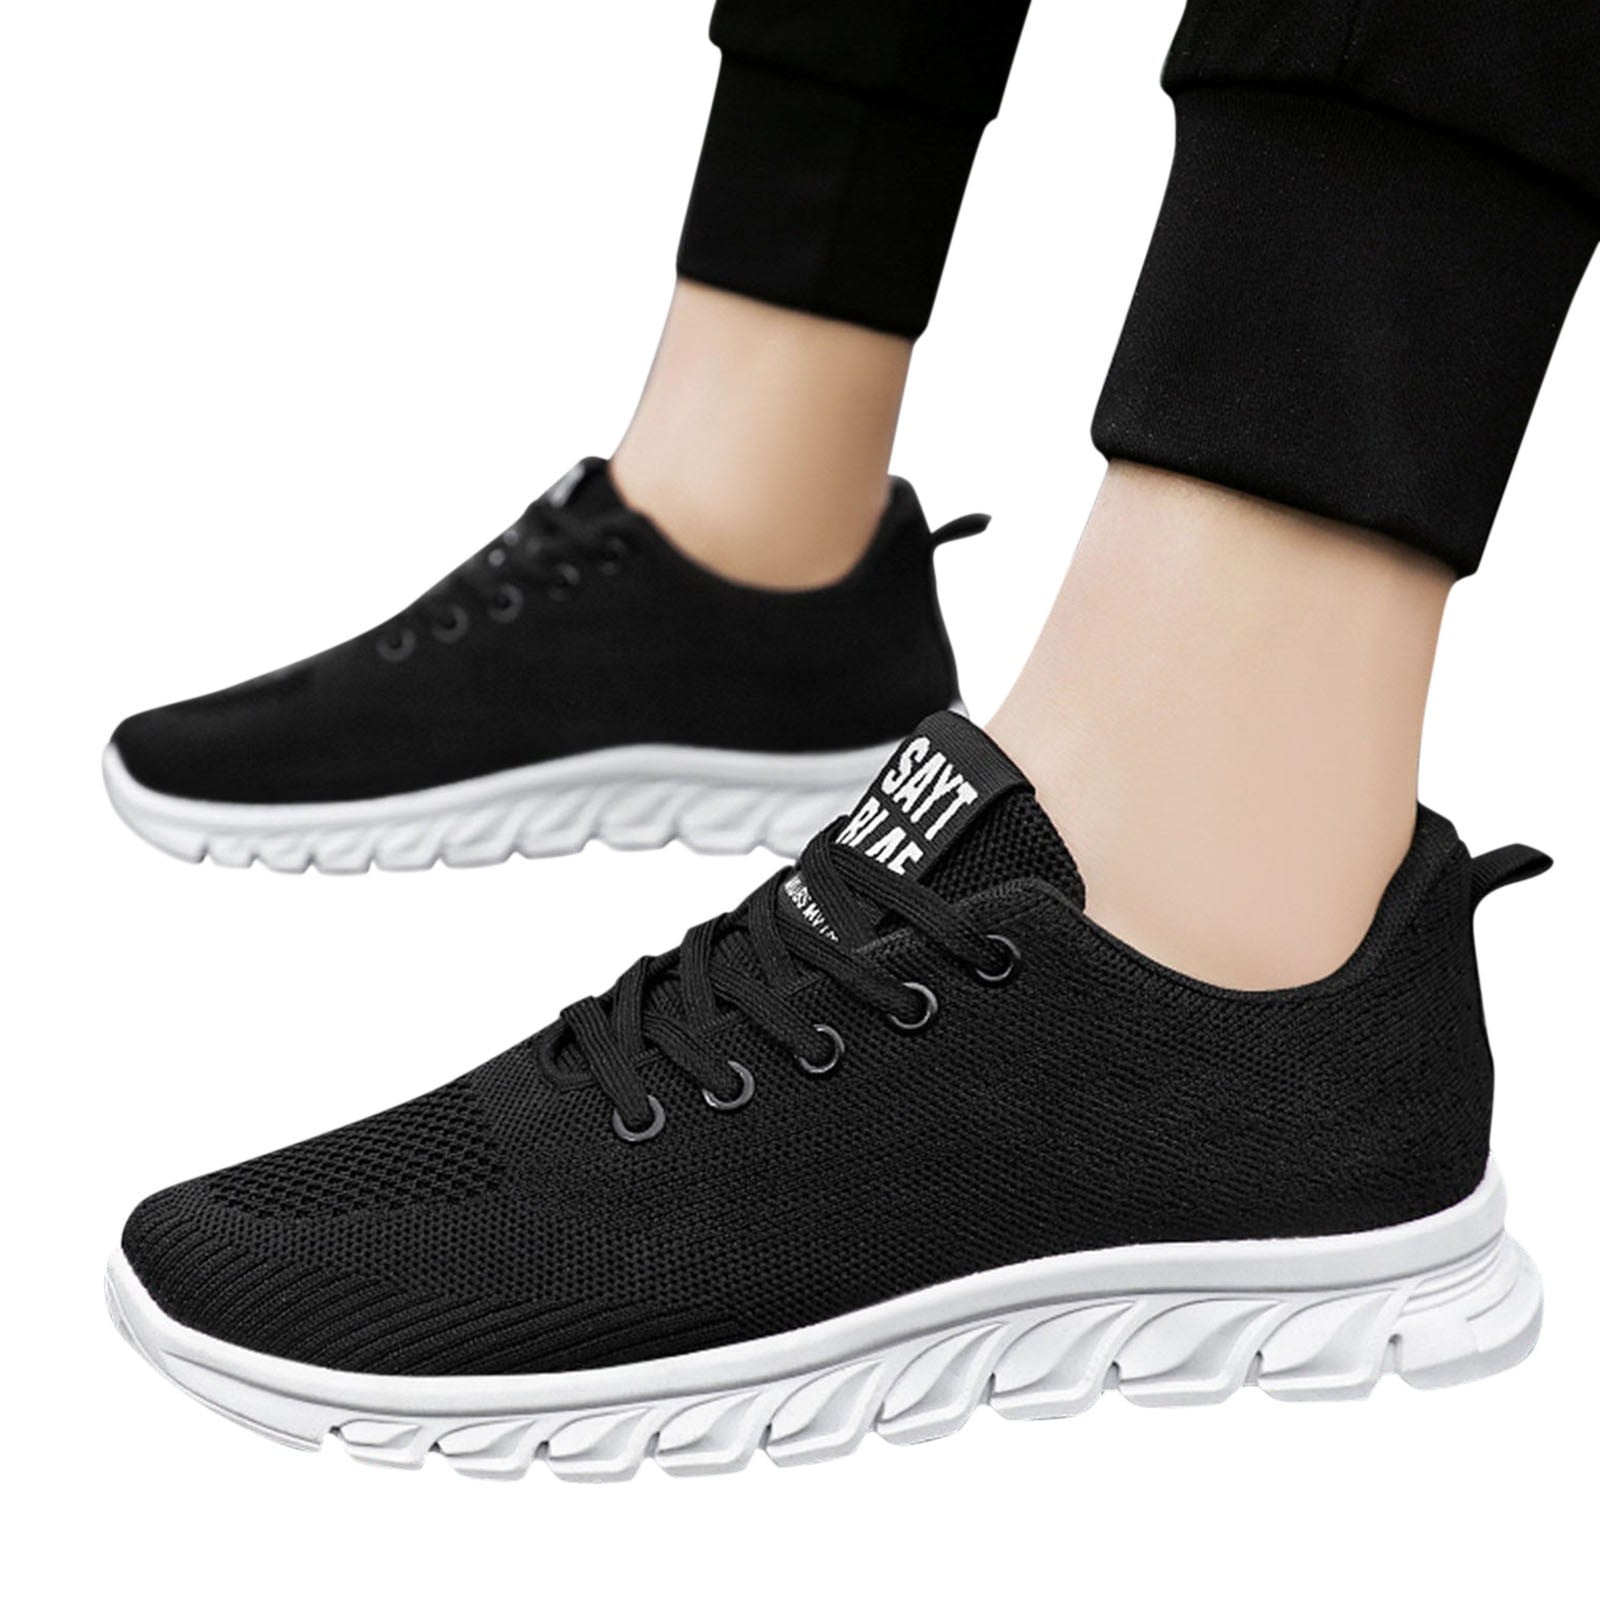 Buy RIFFWAY All New Fashionable Sneakers for Men | Running Training Gym  Casual Shoes All Purpose Shoes with Advanced Three Layer Cusion Insole  Comfort Sports Shoes (Black Size 10) at Amazon.in